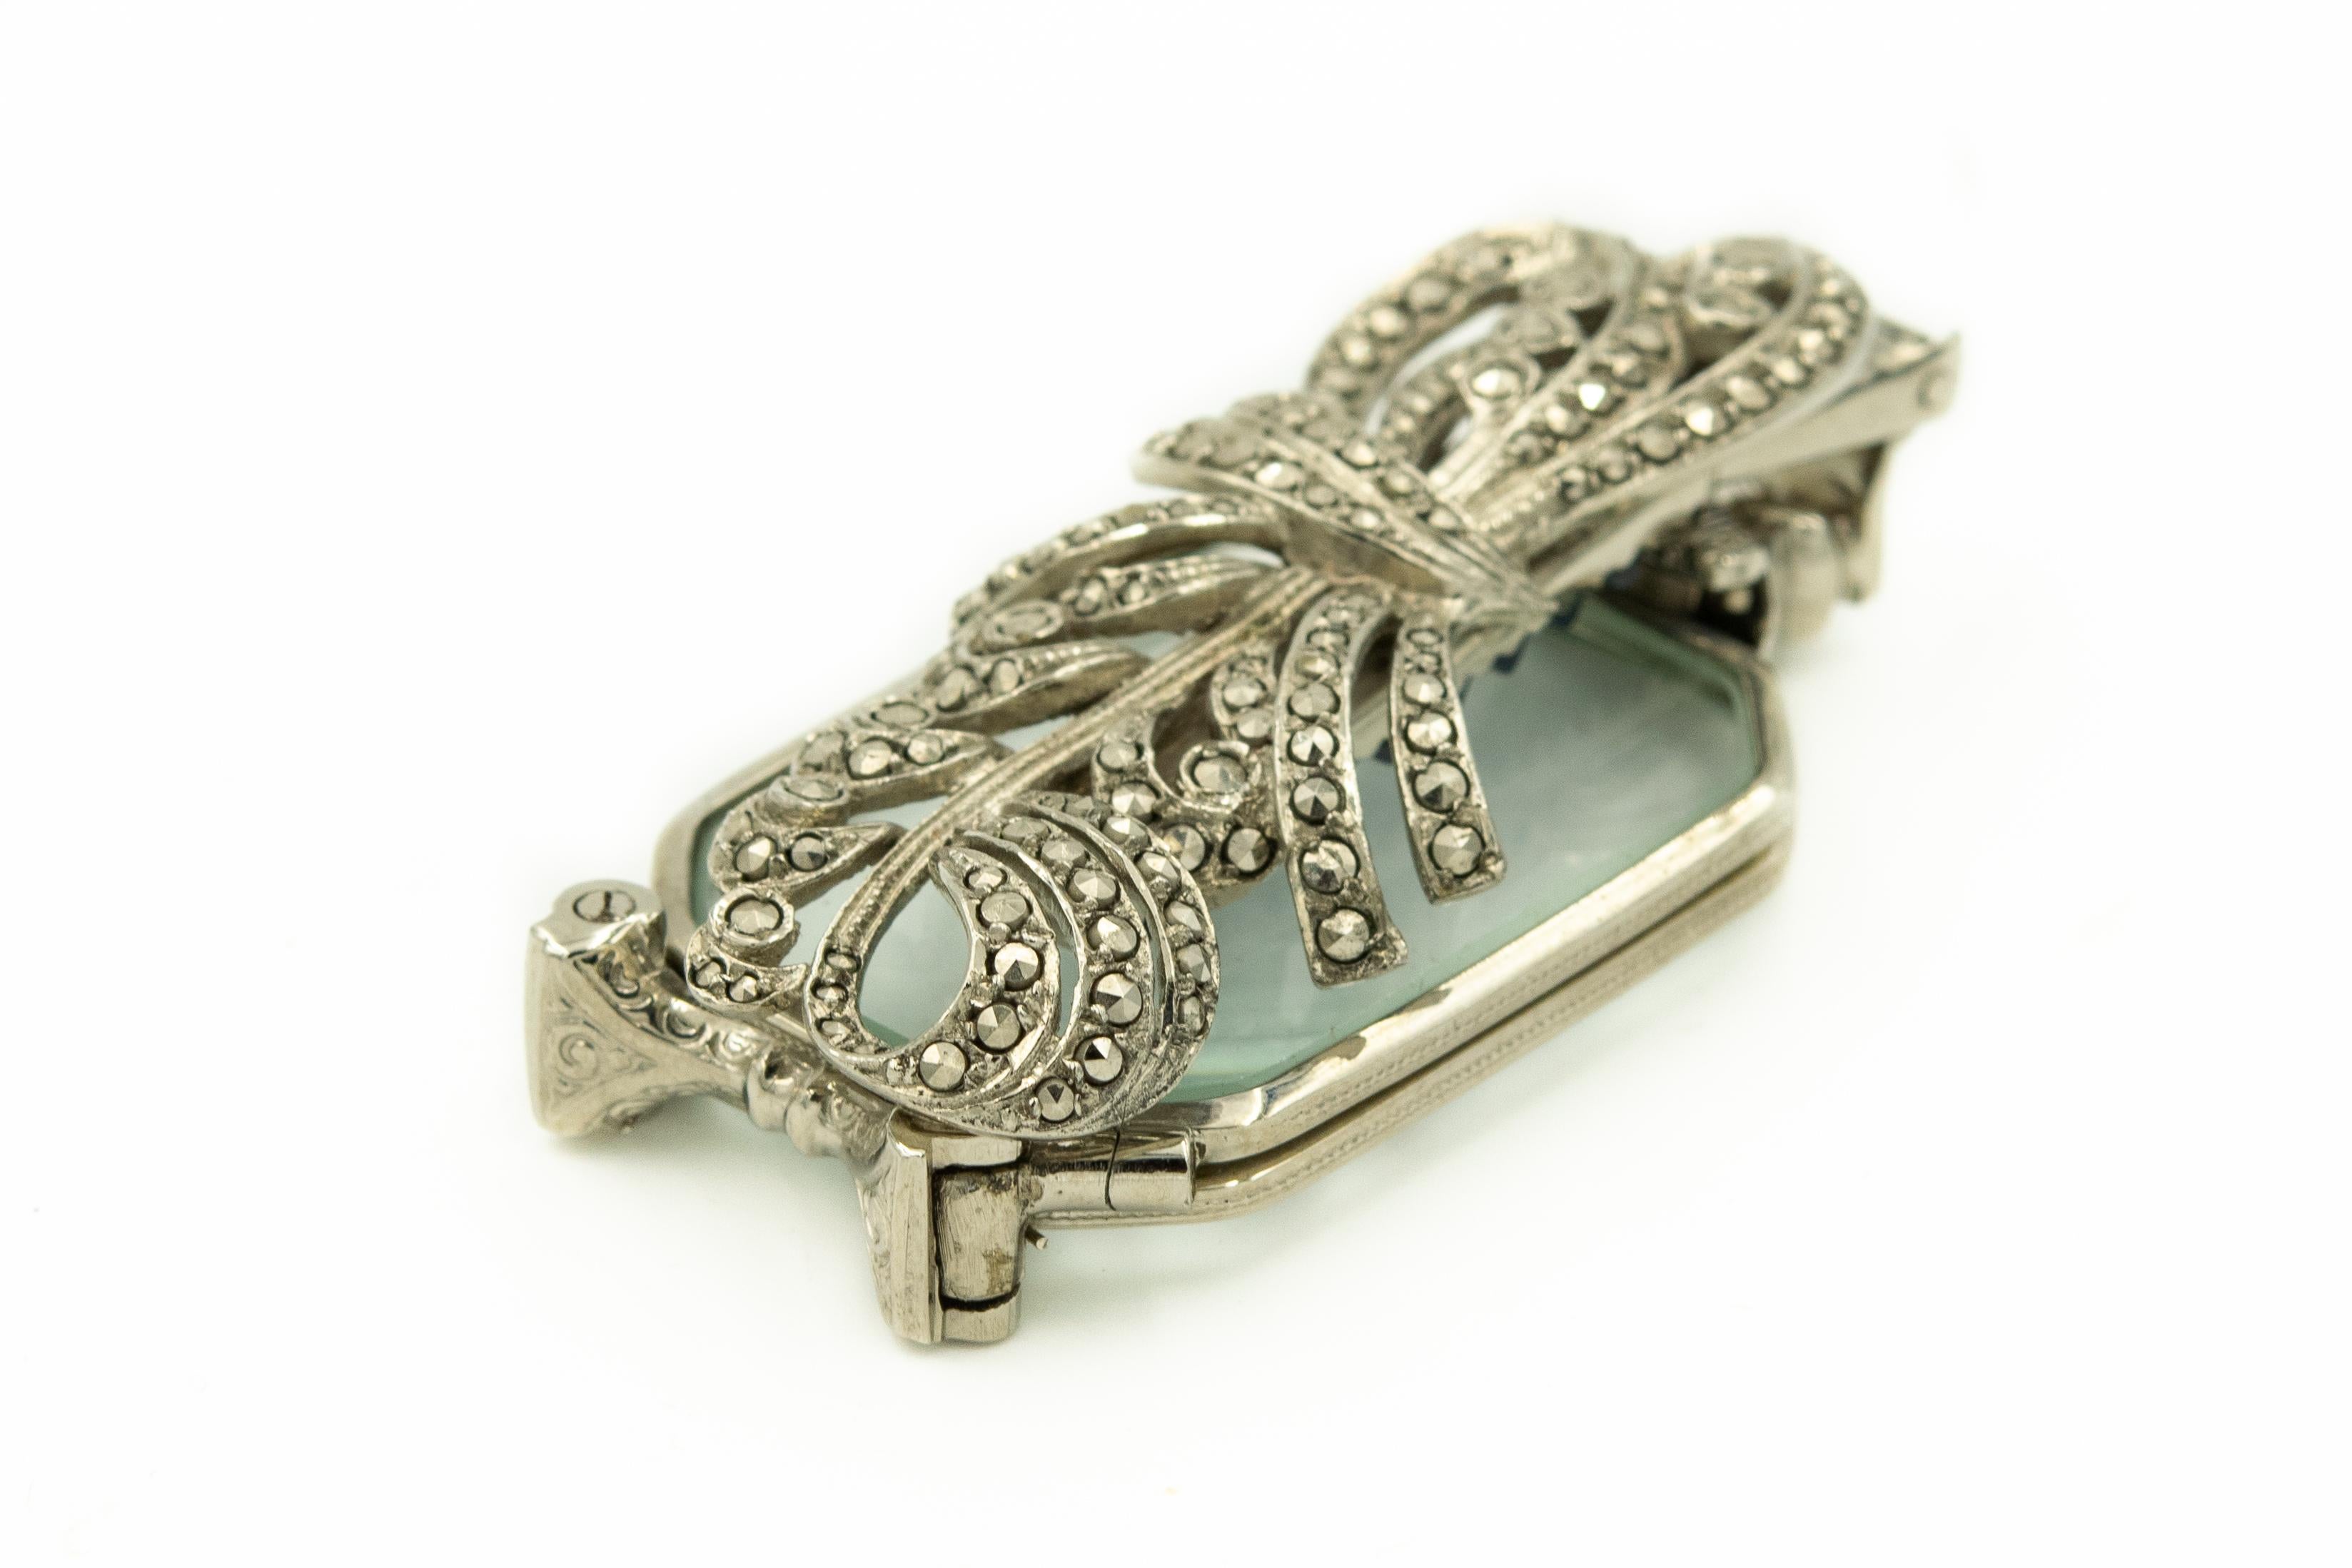 Elegant Antique silver & marcasite folding lorgnette.  It features a bow motif with curling scrolls.  The lorgnette folds neatly and can be worn as a clip brooch.  It measures 2.26